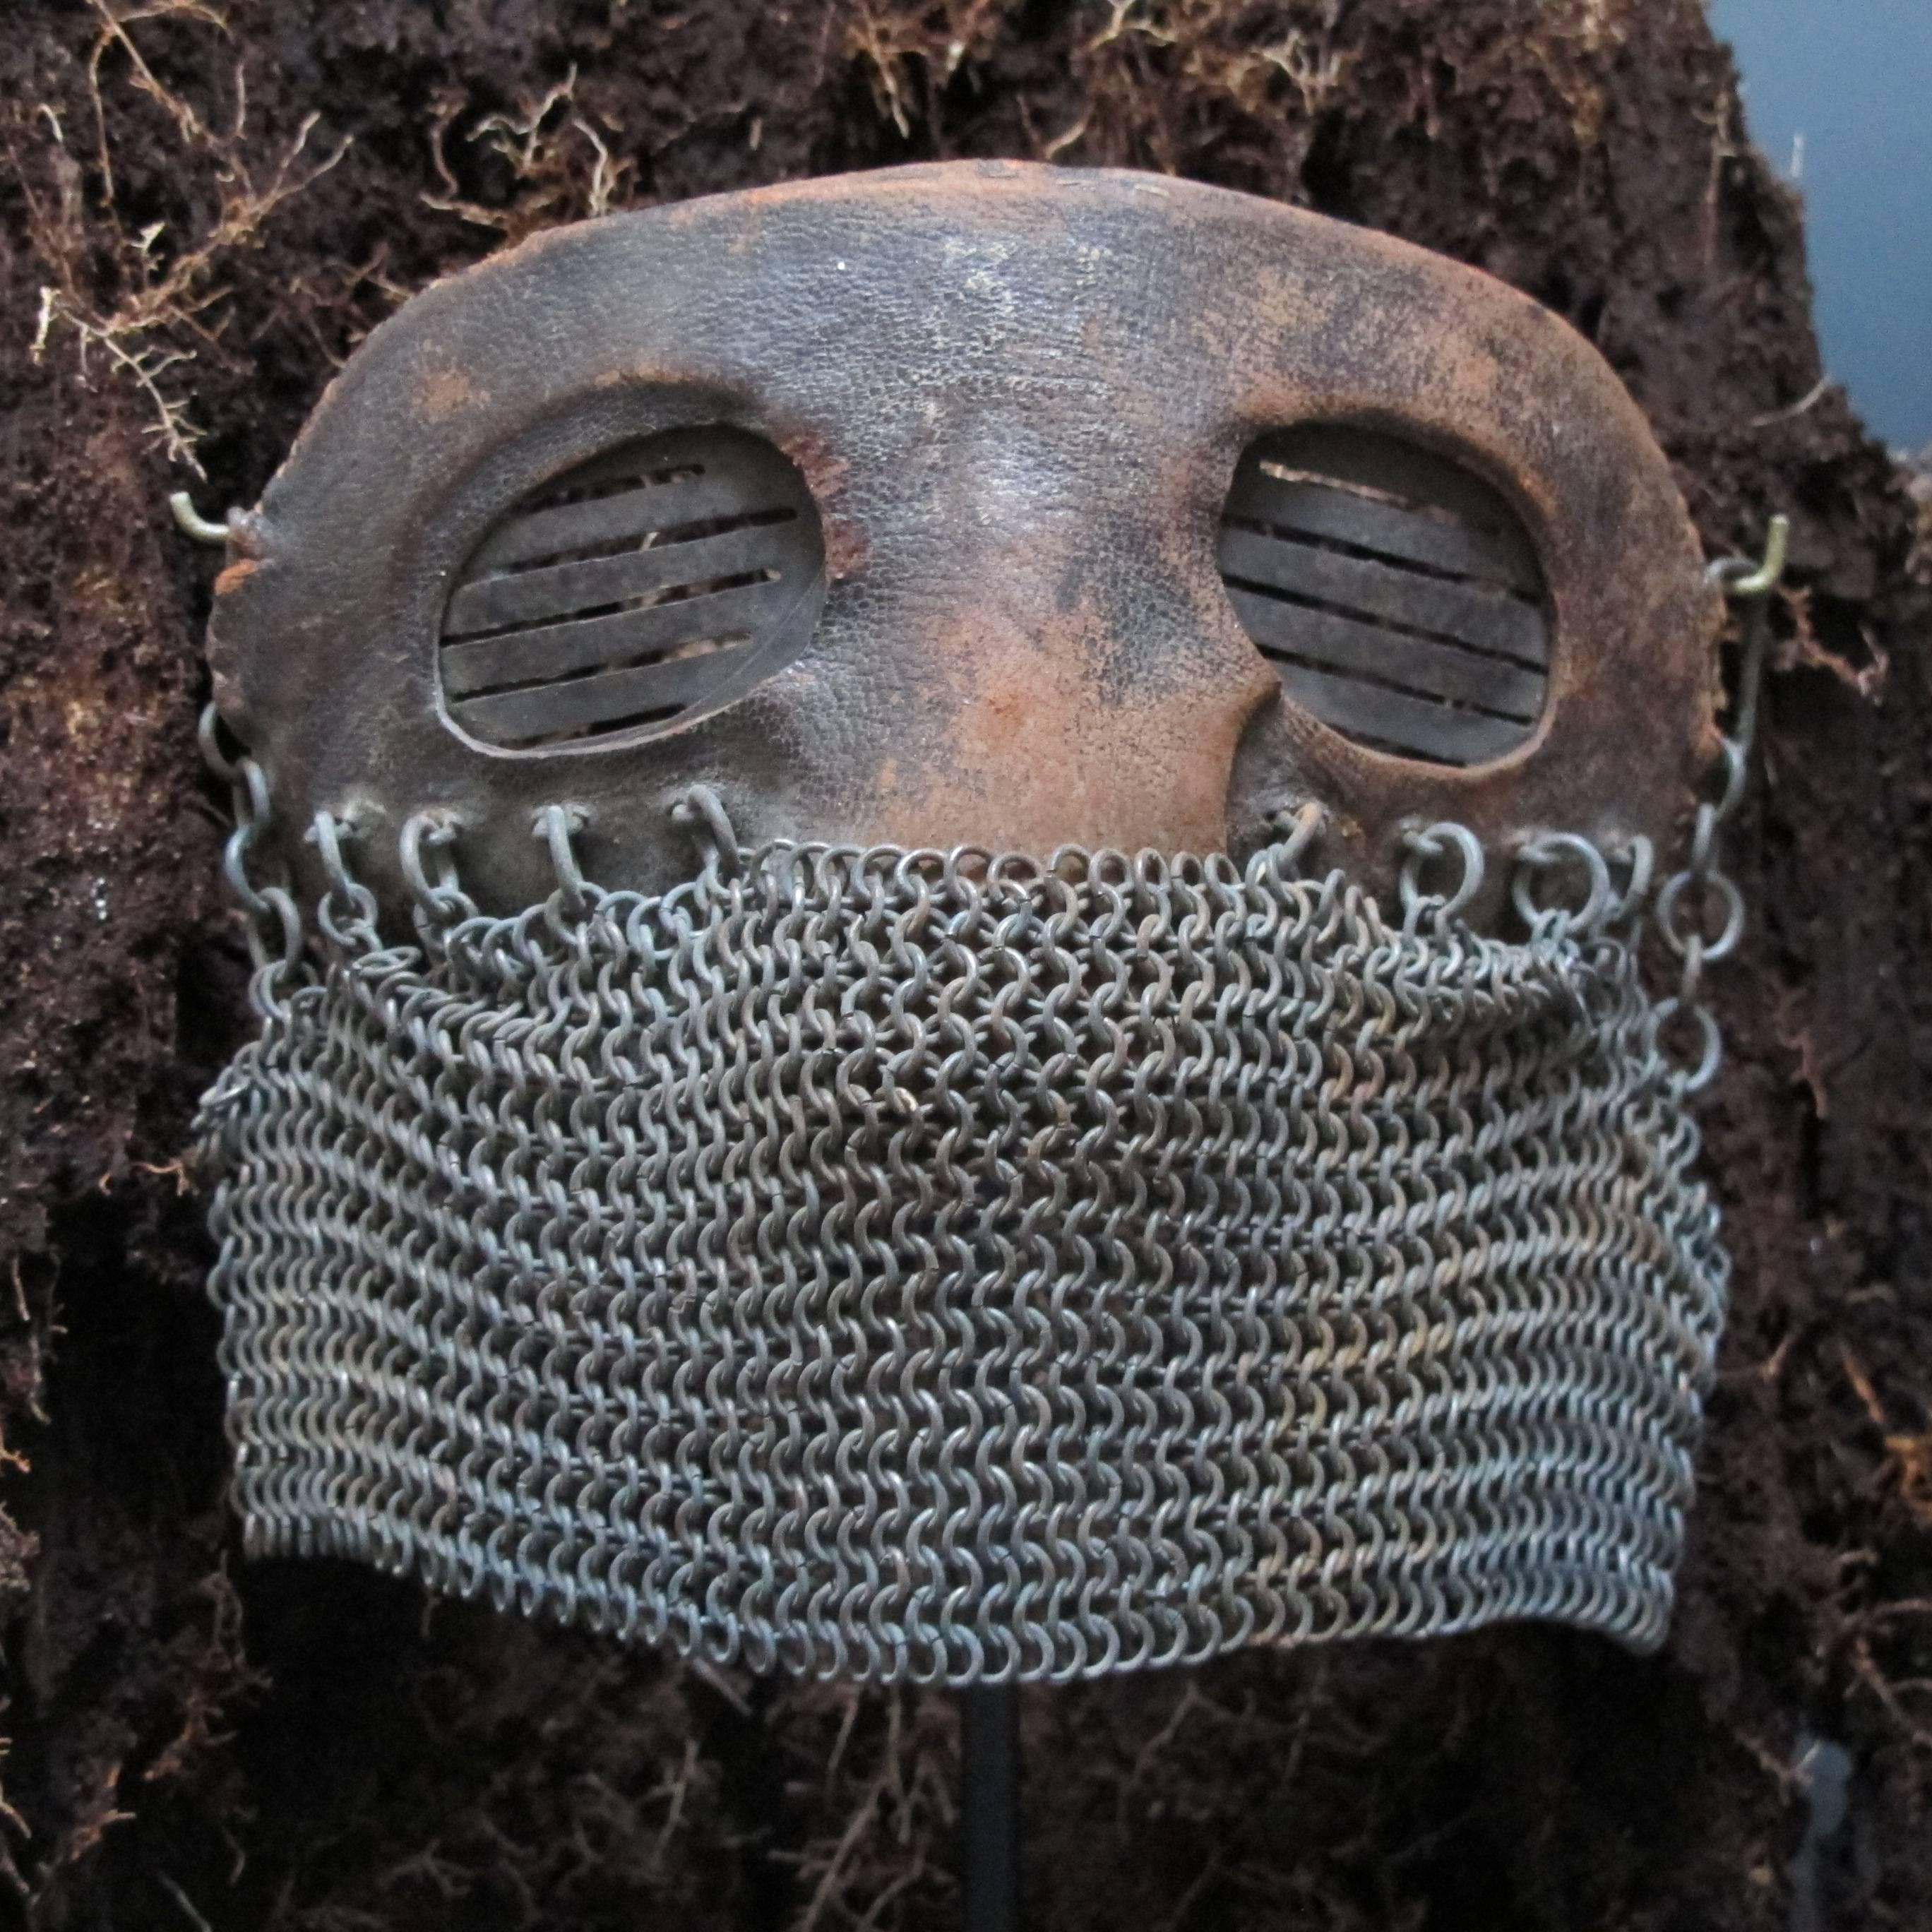 English Tank Operators Mask from WWI of Iron Leather and Chain Mail